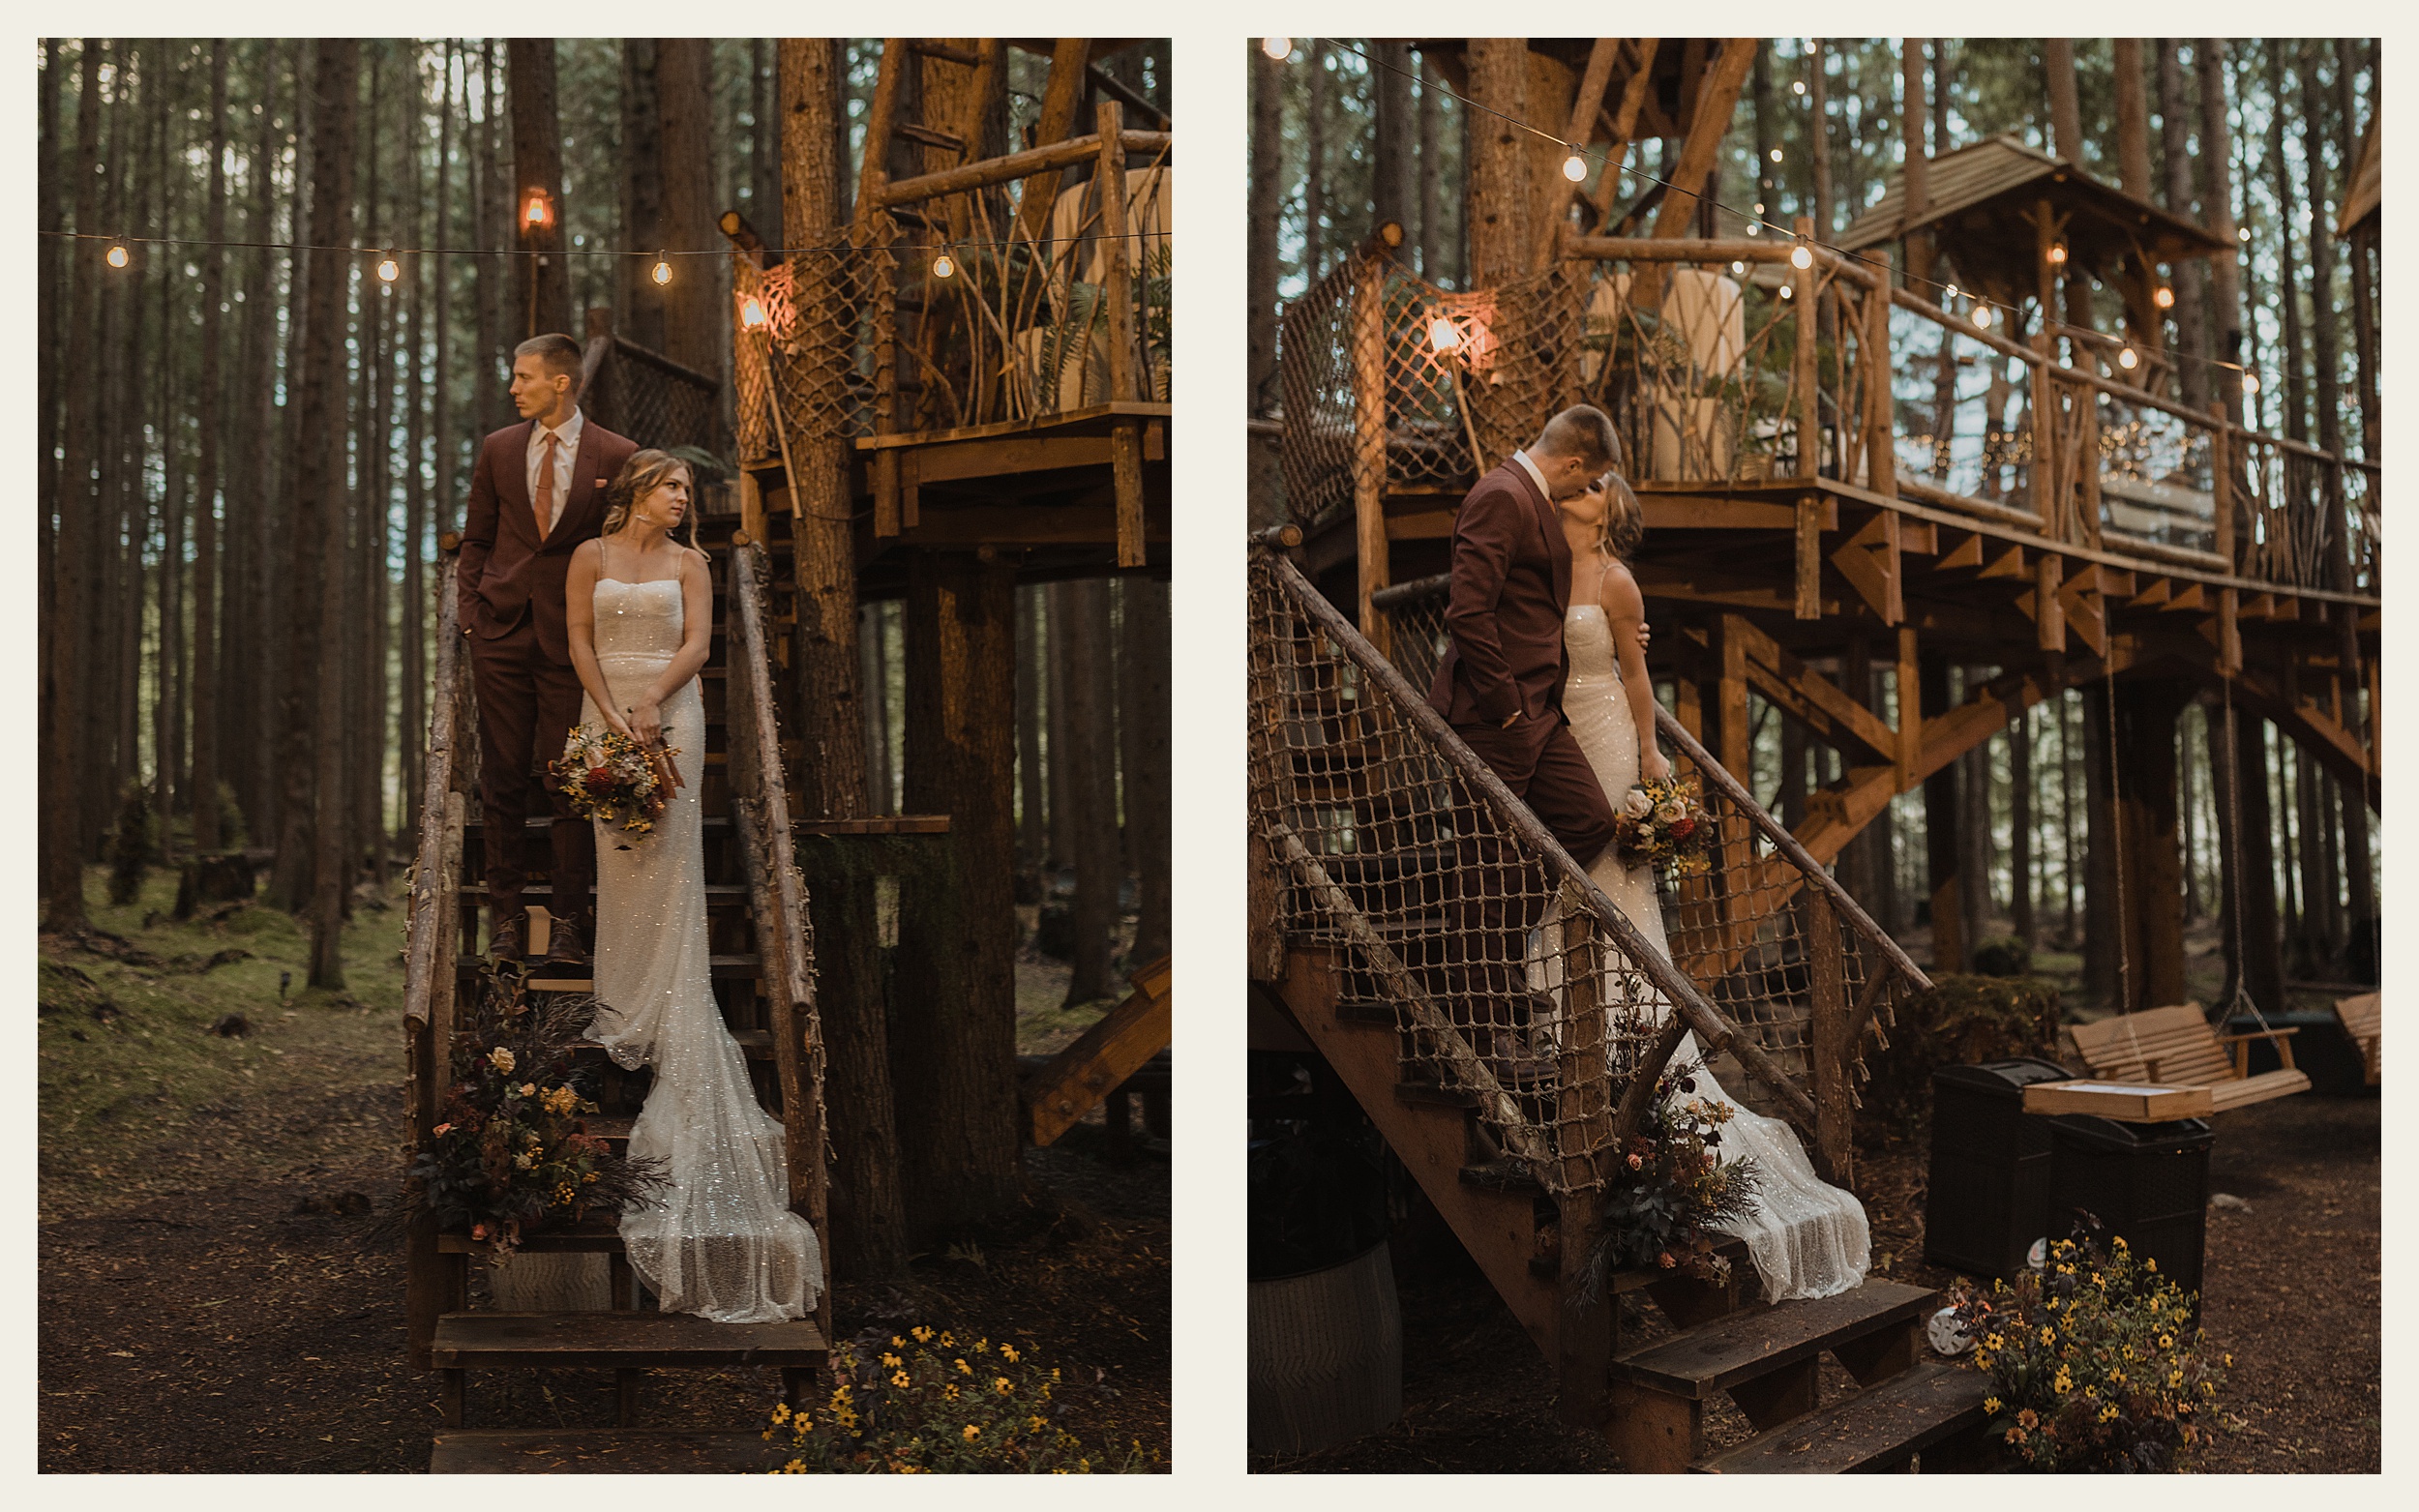 bride and groom standing on stairs treehouse and emerald forest landscape

